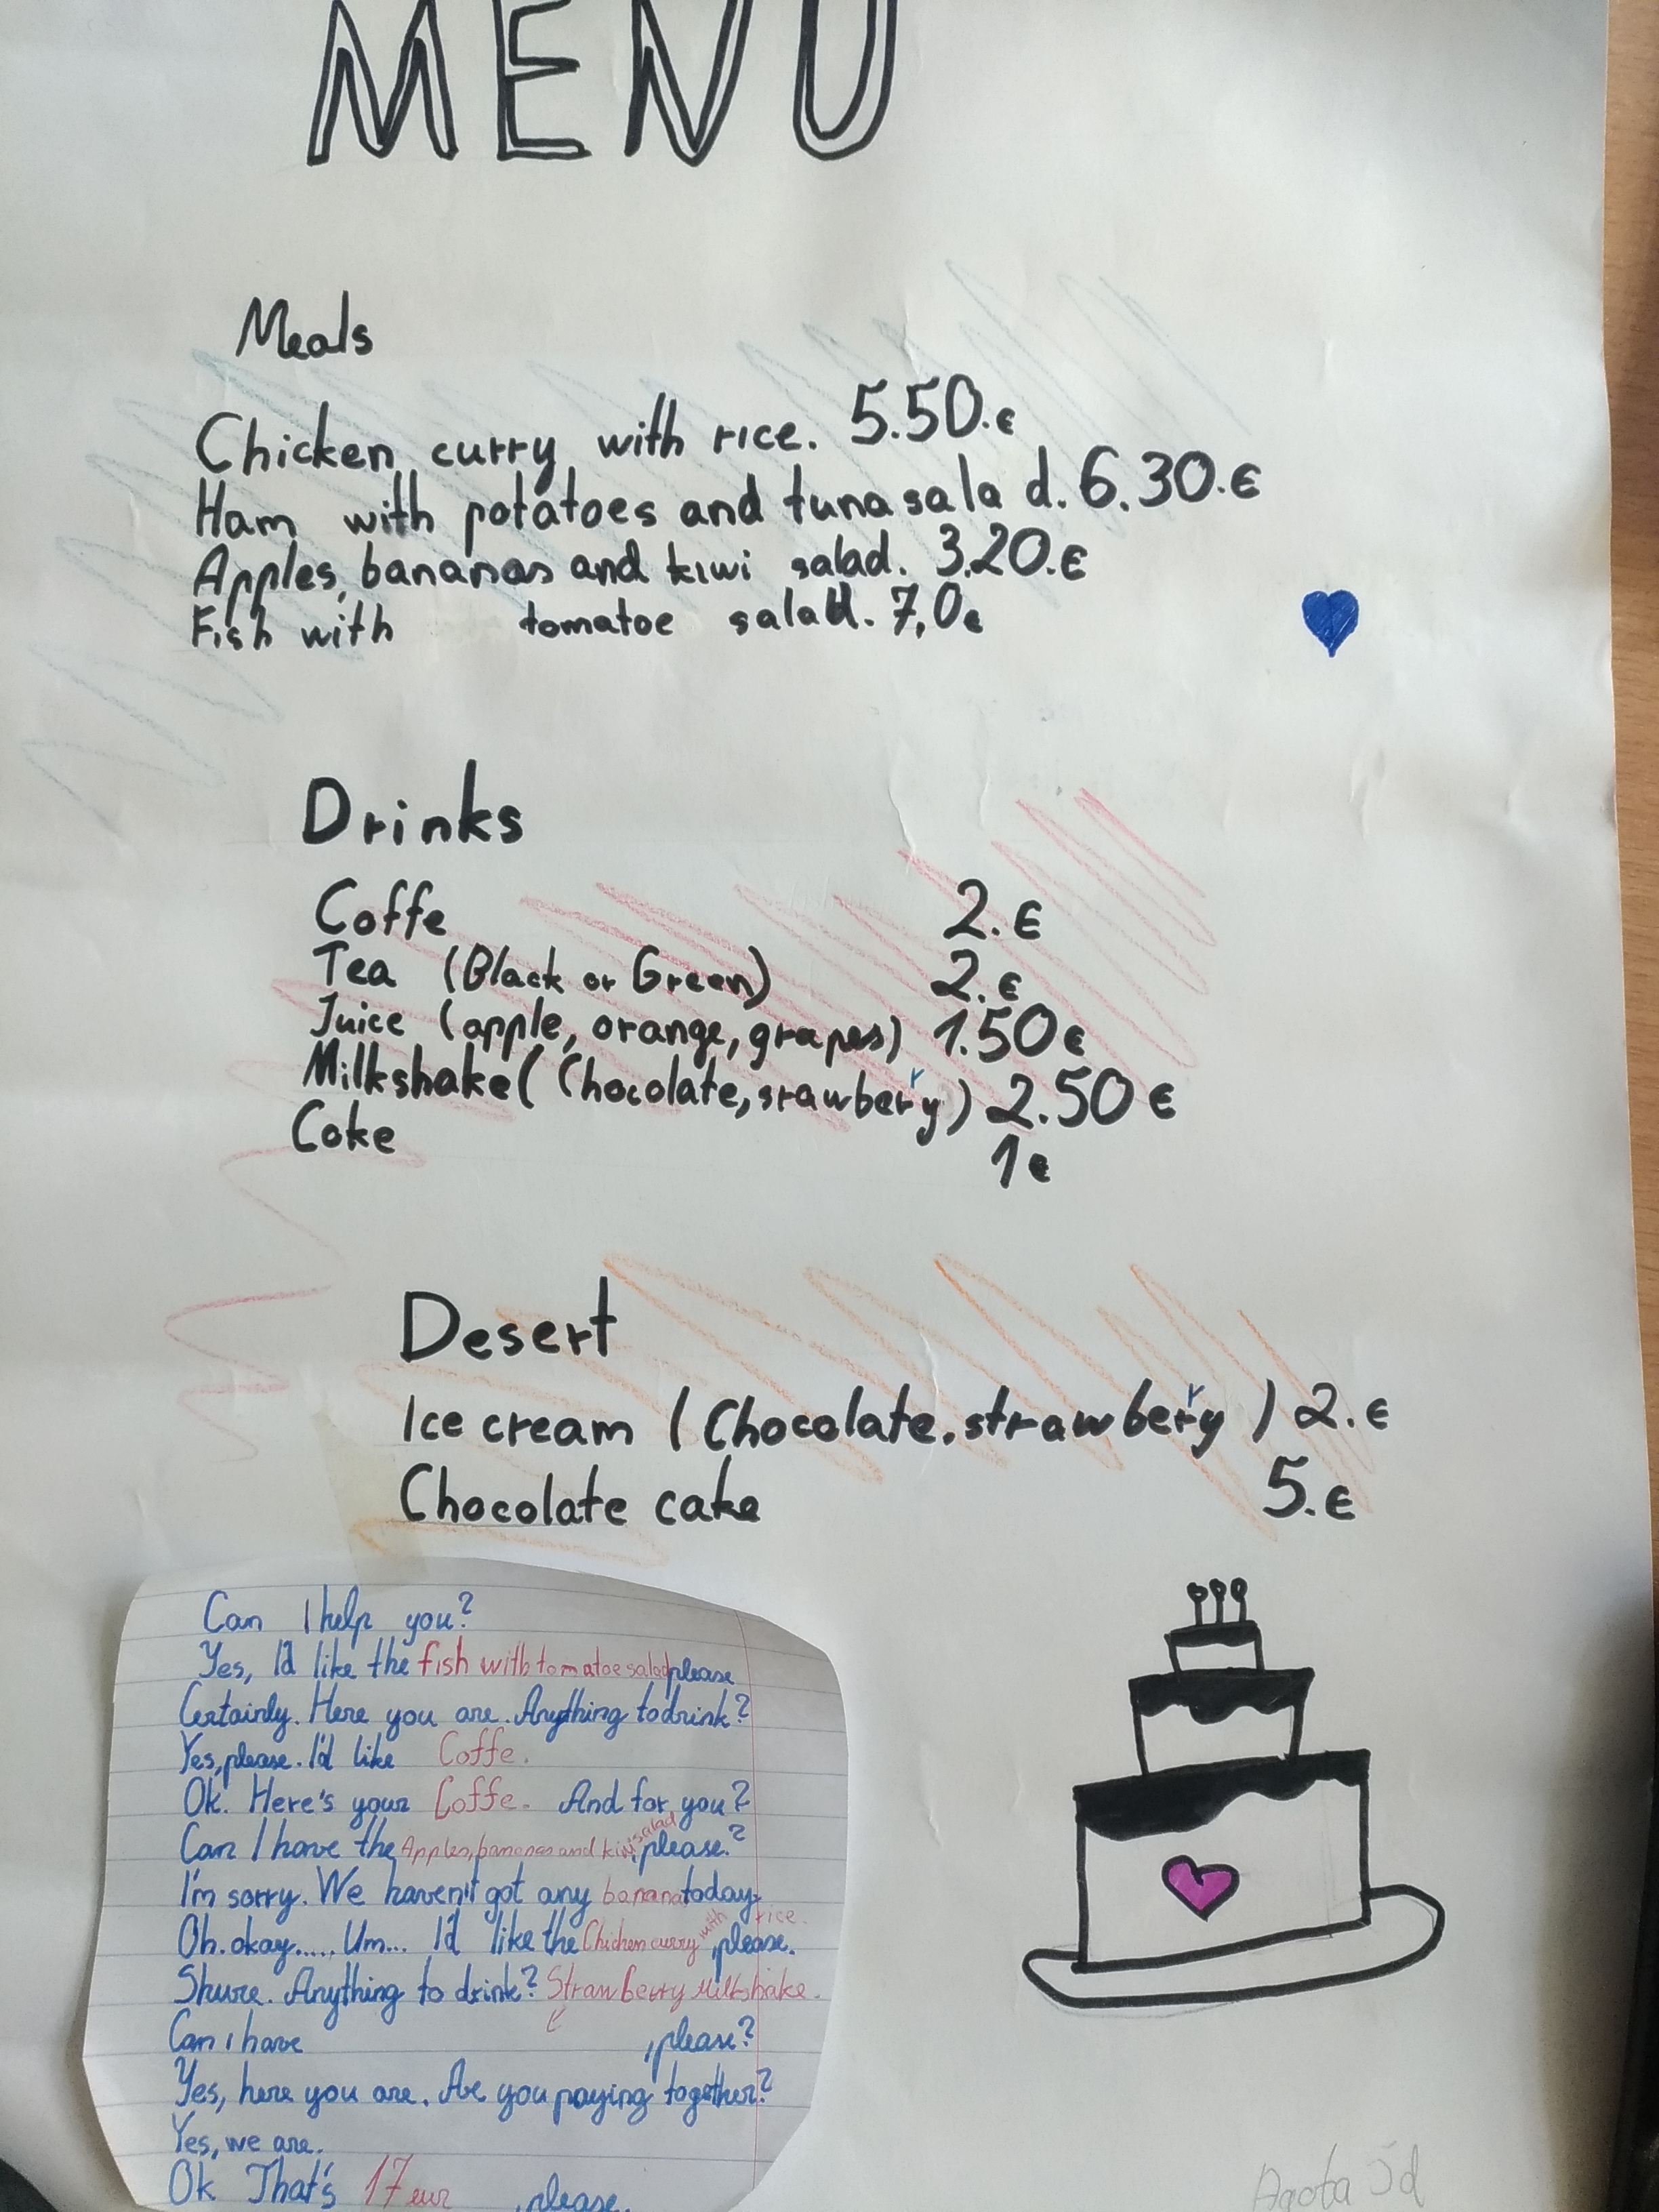 Project Ordering Food and Drinks in a Cafe MENU level A2 Vilnius Jonas Basanavičius pregymnasium 5th graders 2019 (1)